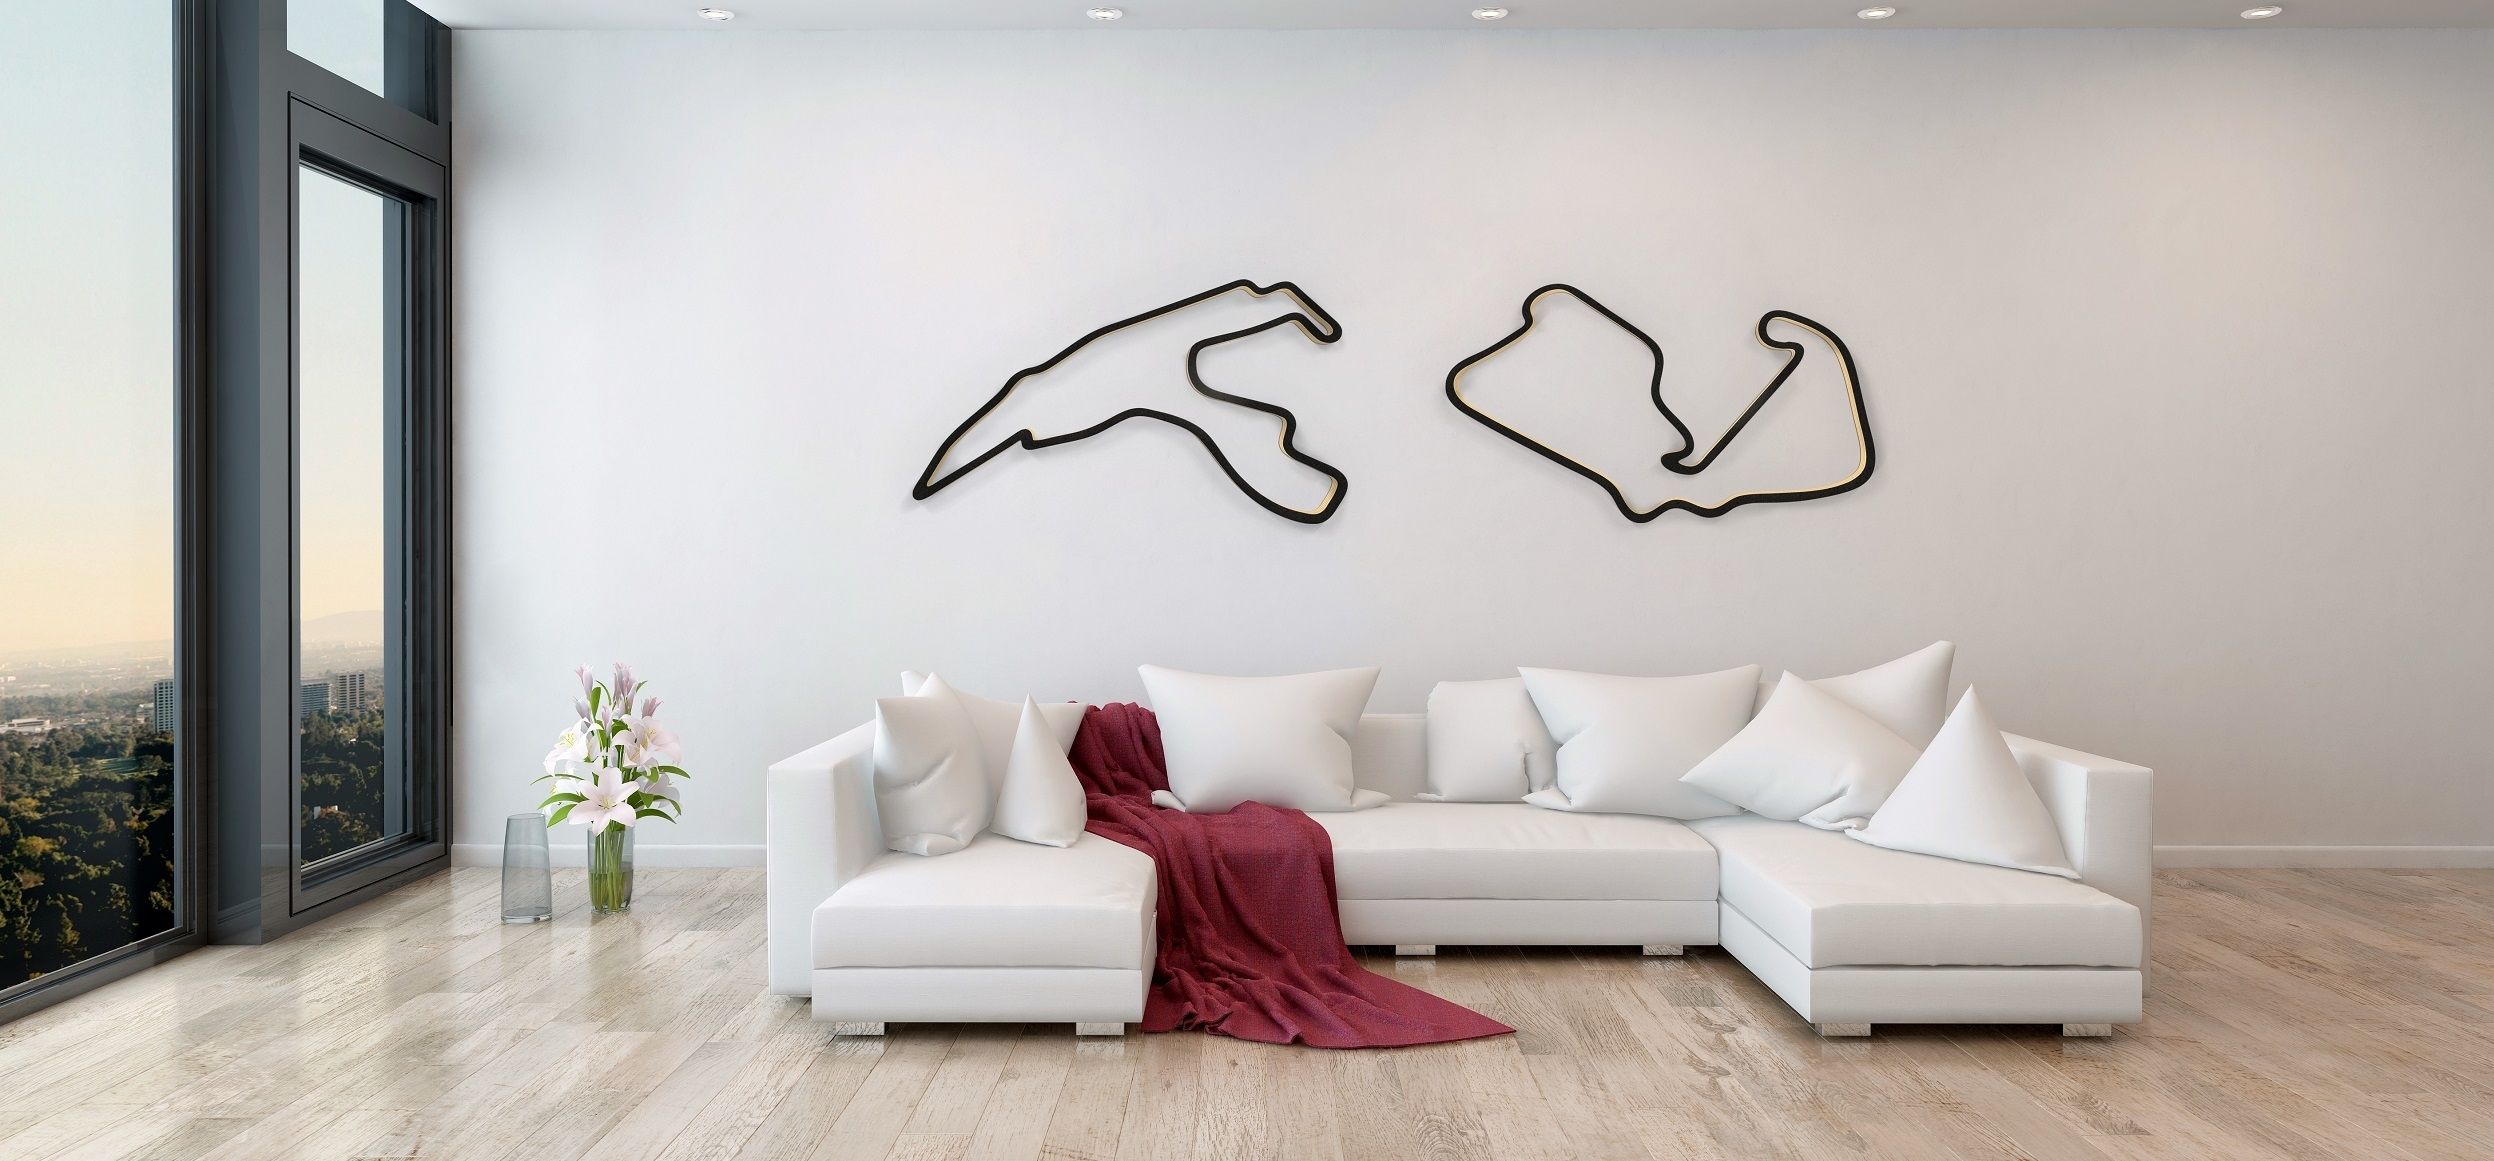 Welcome To Racetrackart Pertaining To Race Track Wall Art (View 2 of 20)